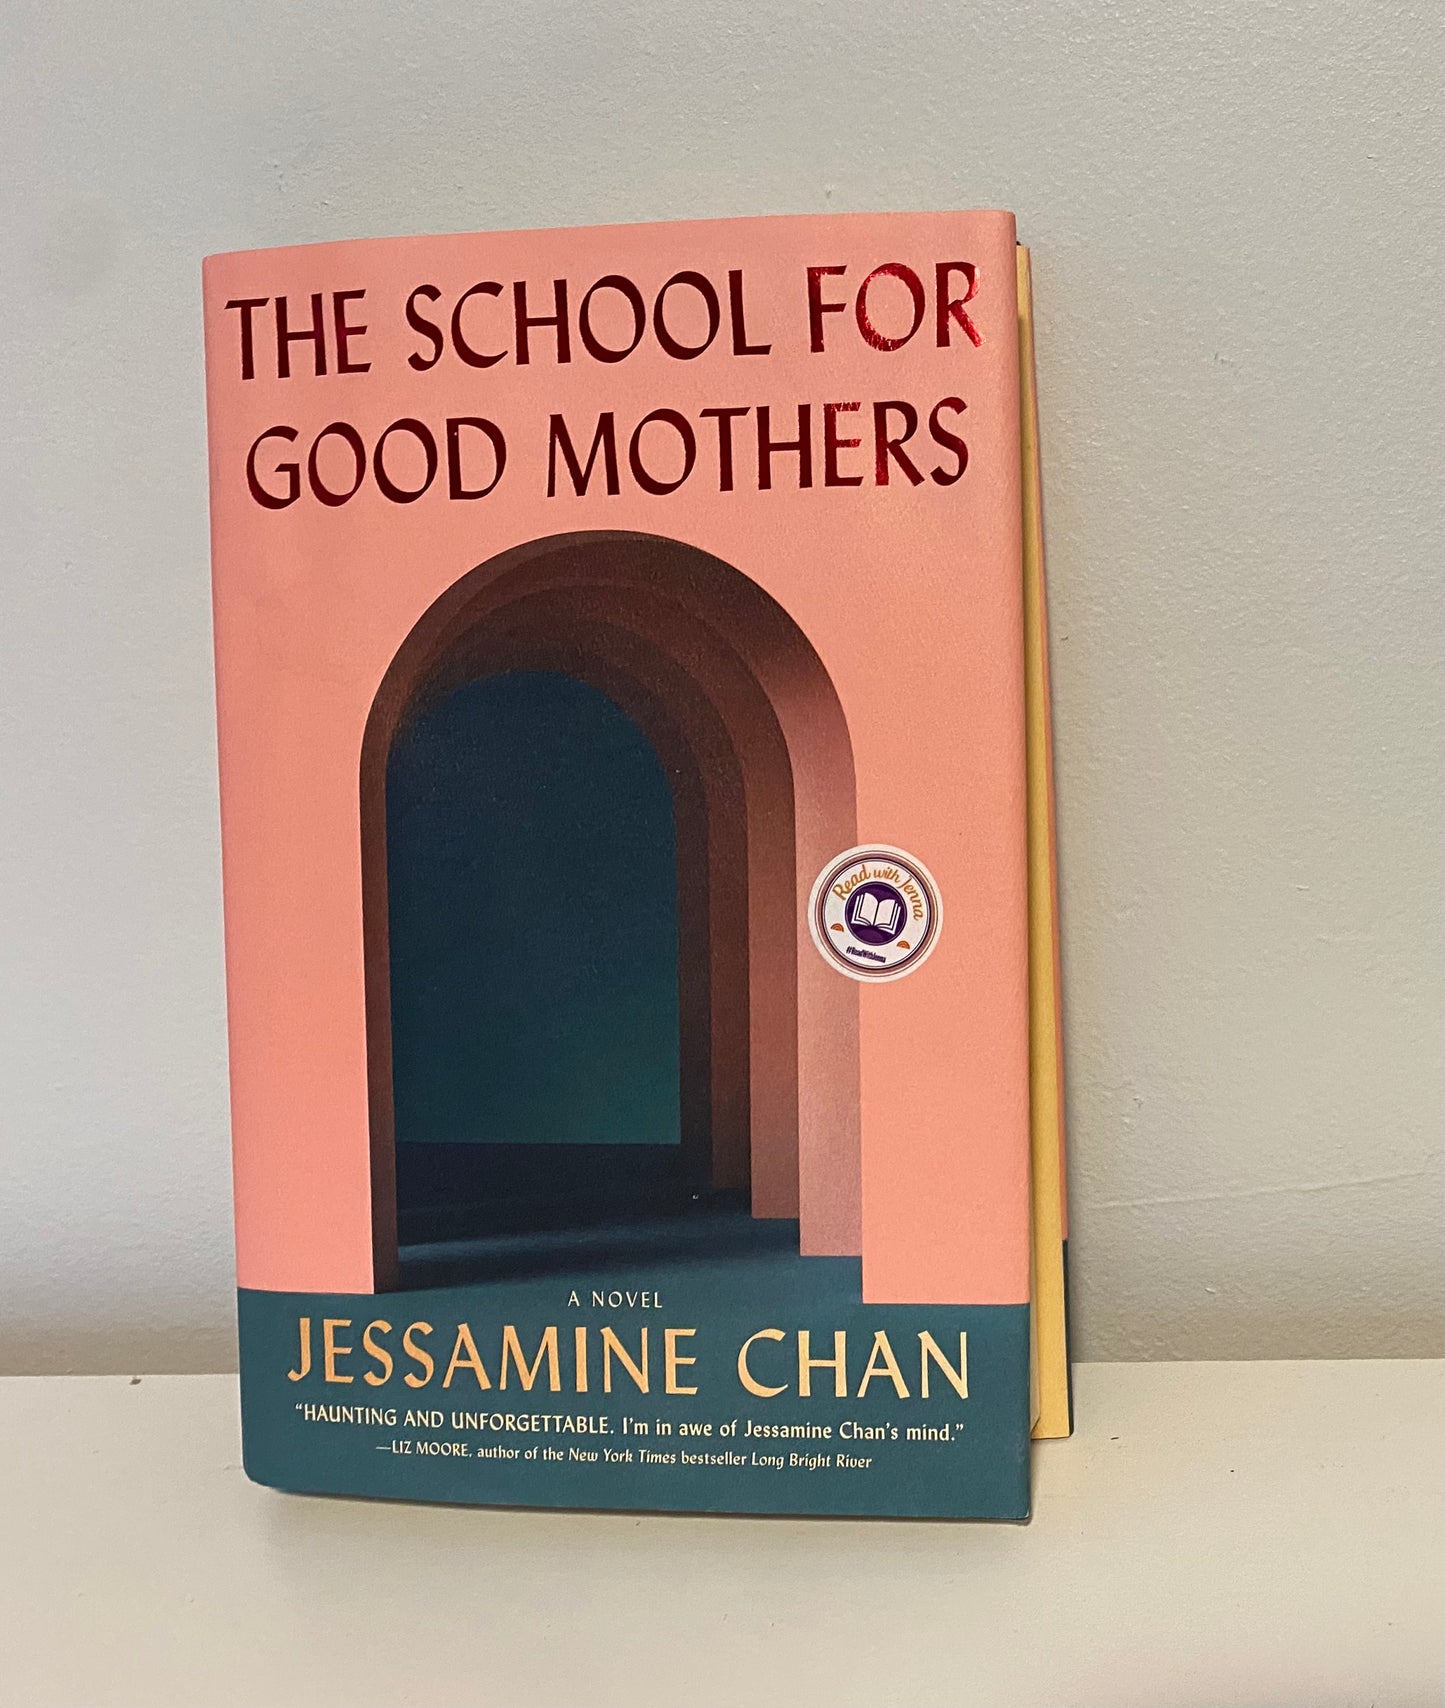 Hardcover- The School for Good Mothers